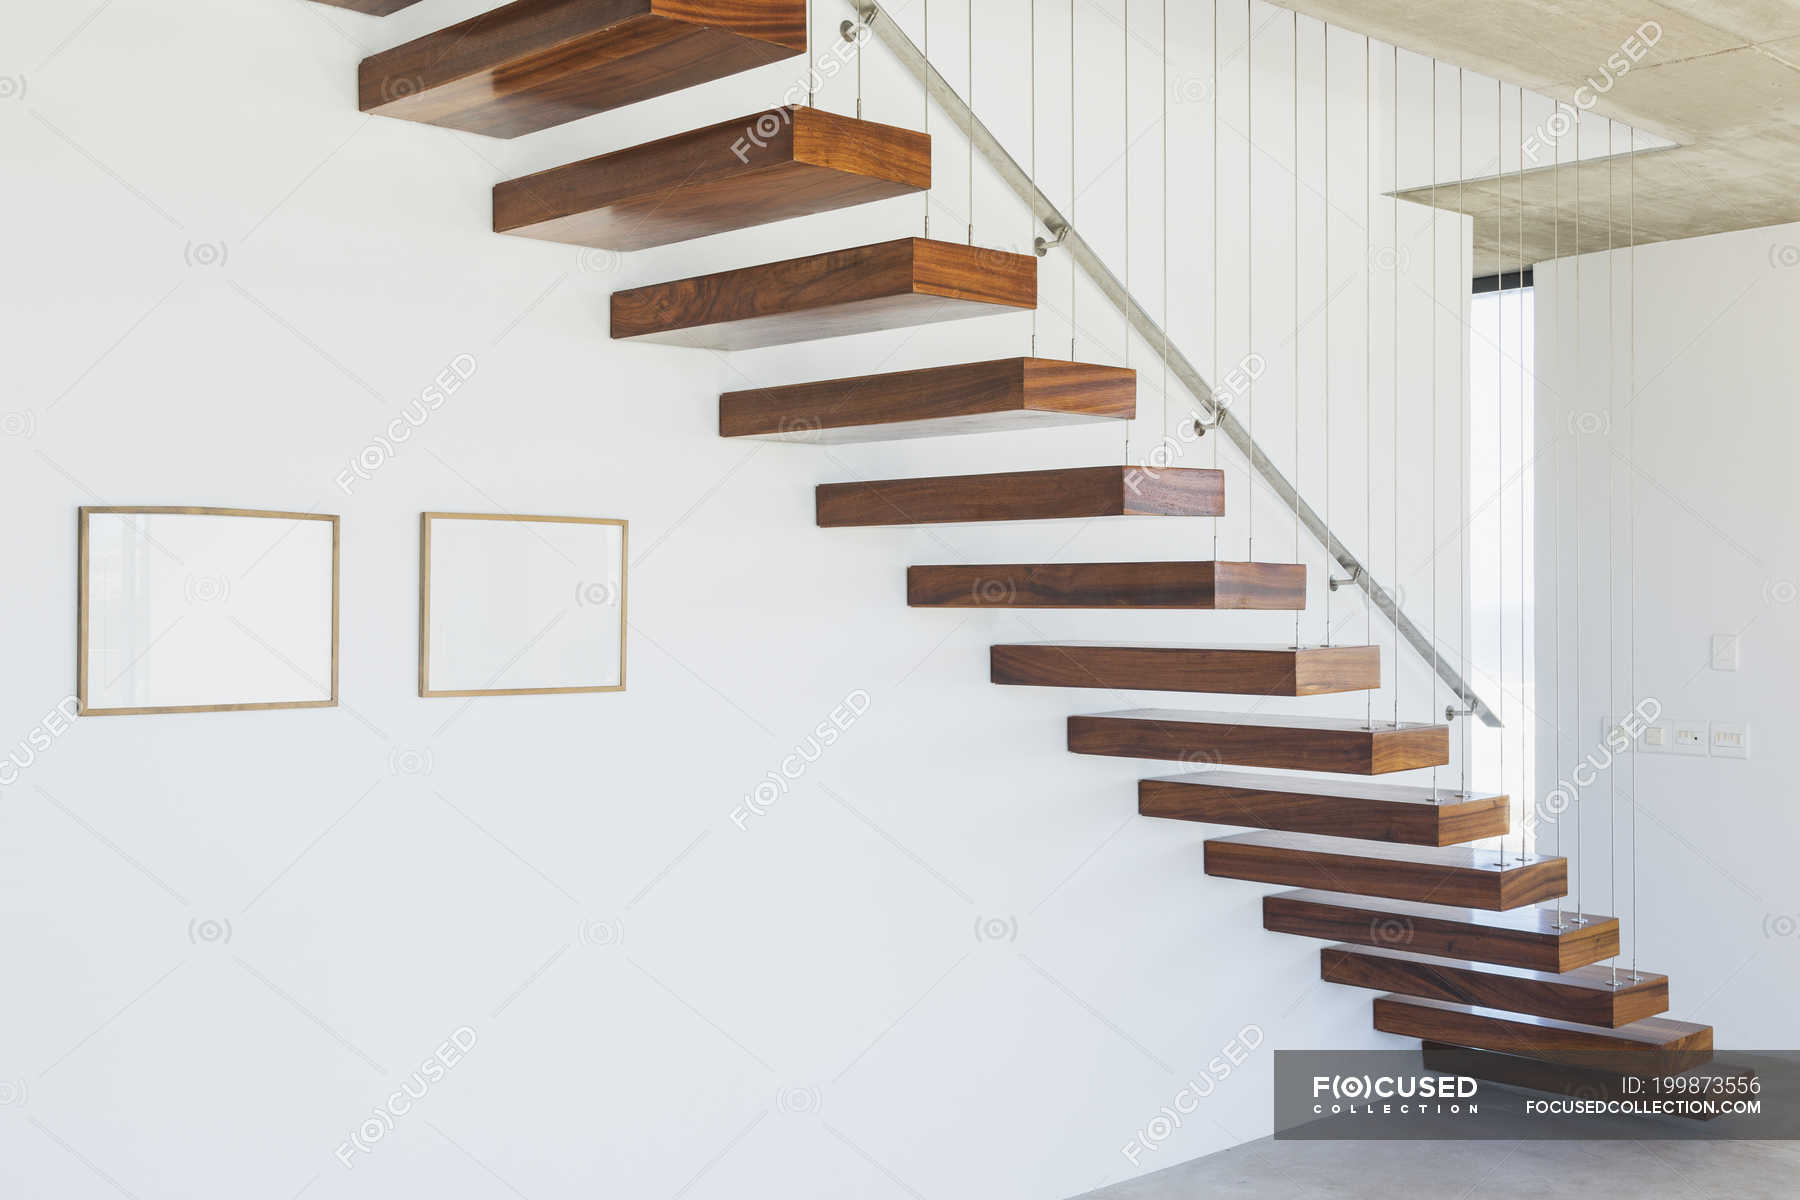 focused 199873556 stock photo floating stairs modern house interior